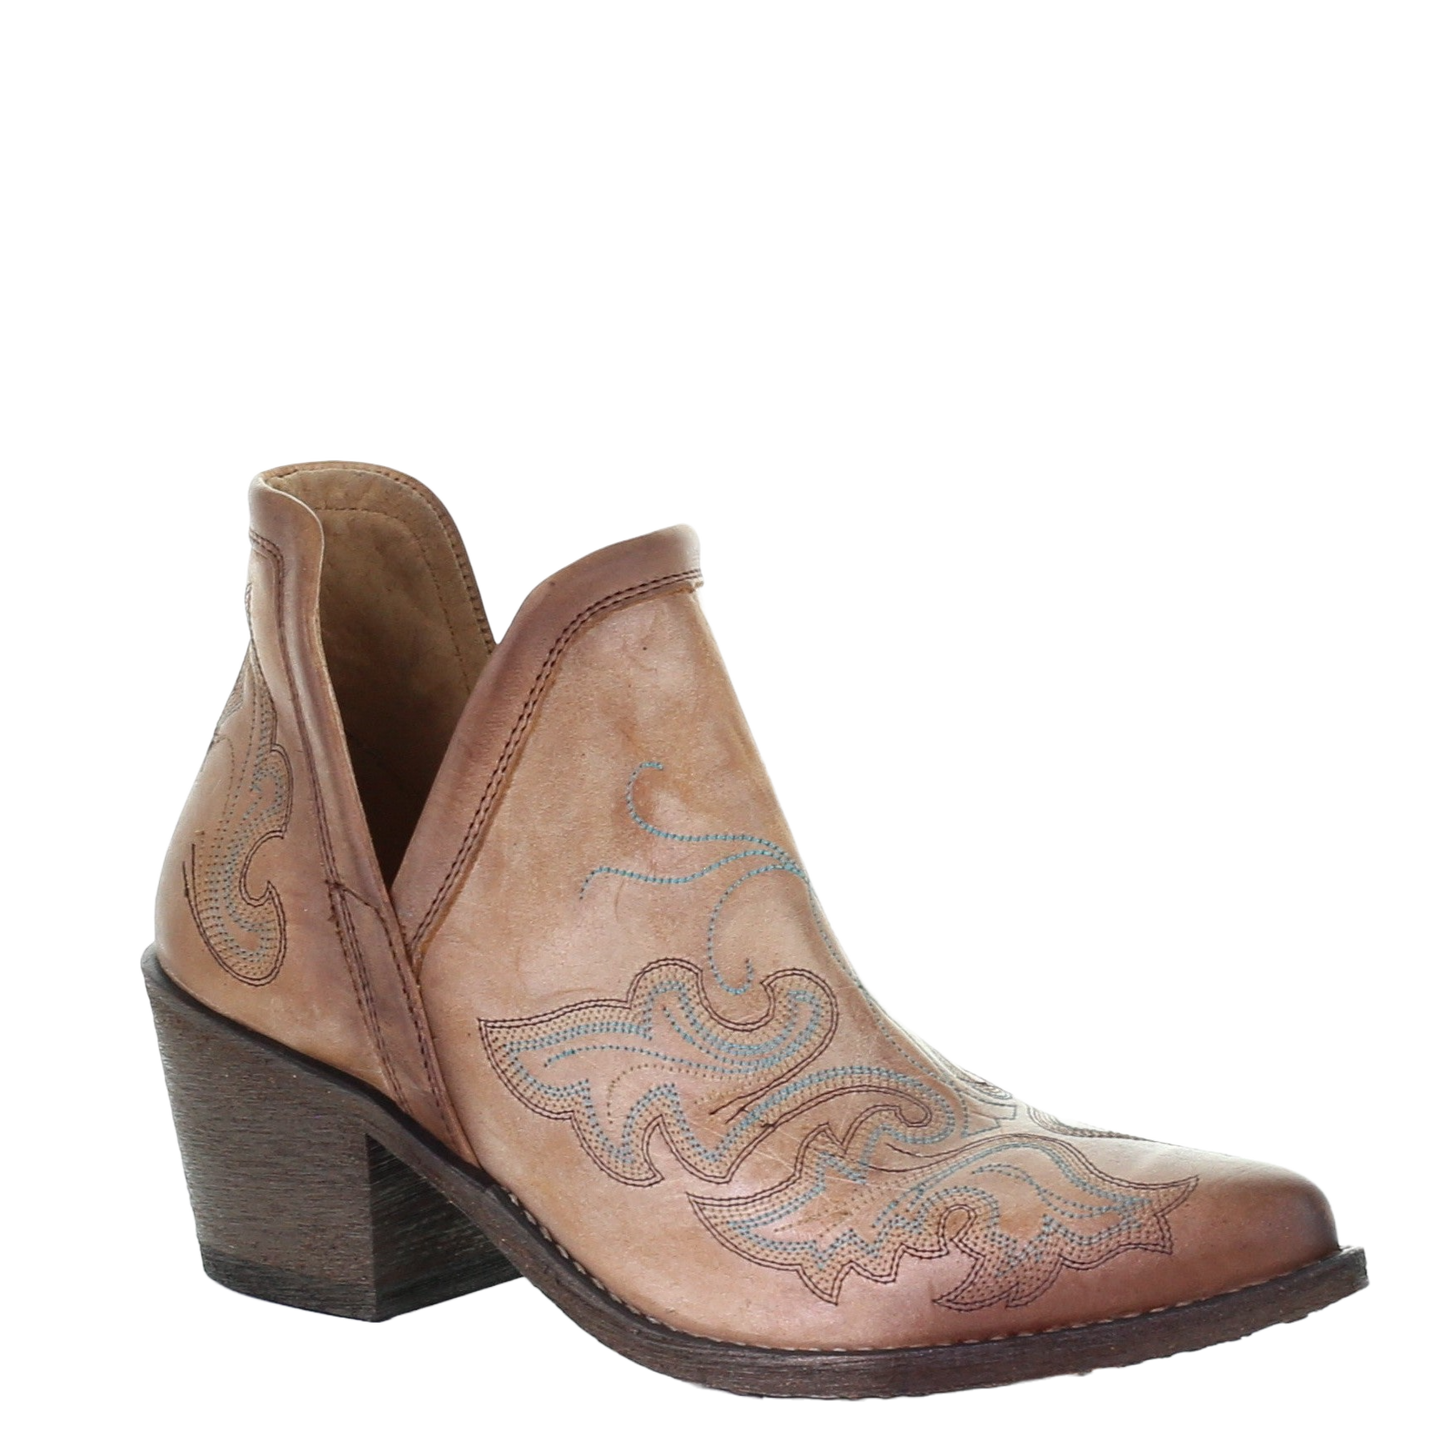 Circle G by Corral Ladies Cognac Embroidery Booties Q0143